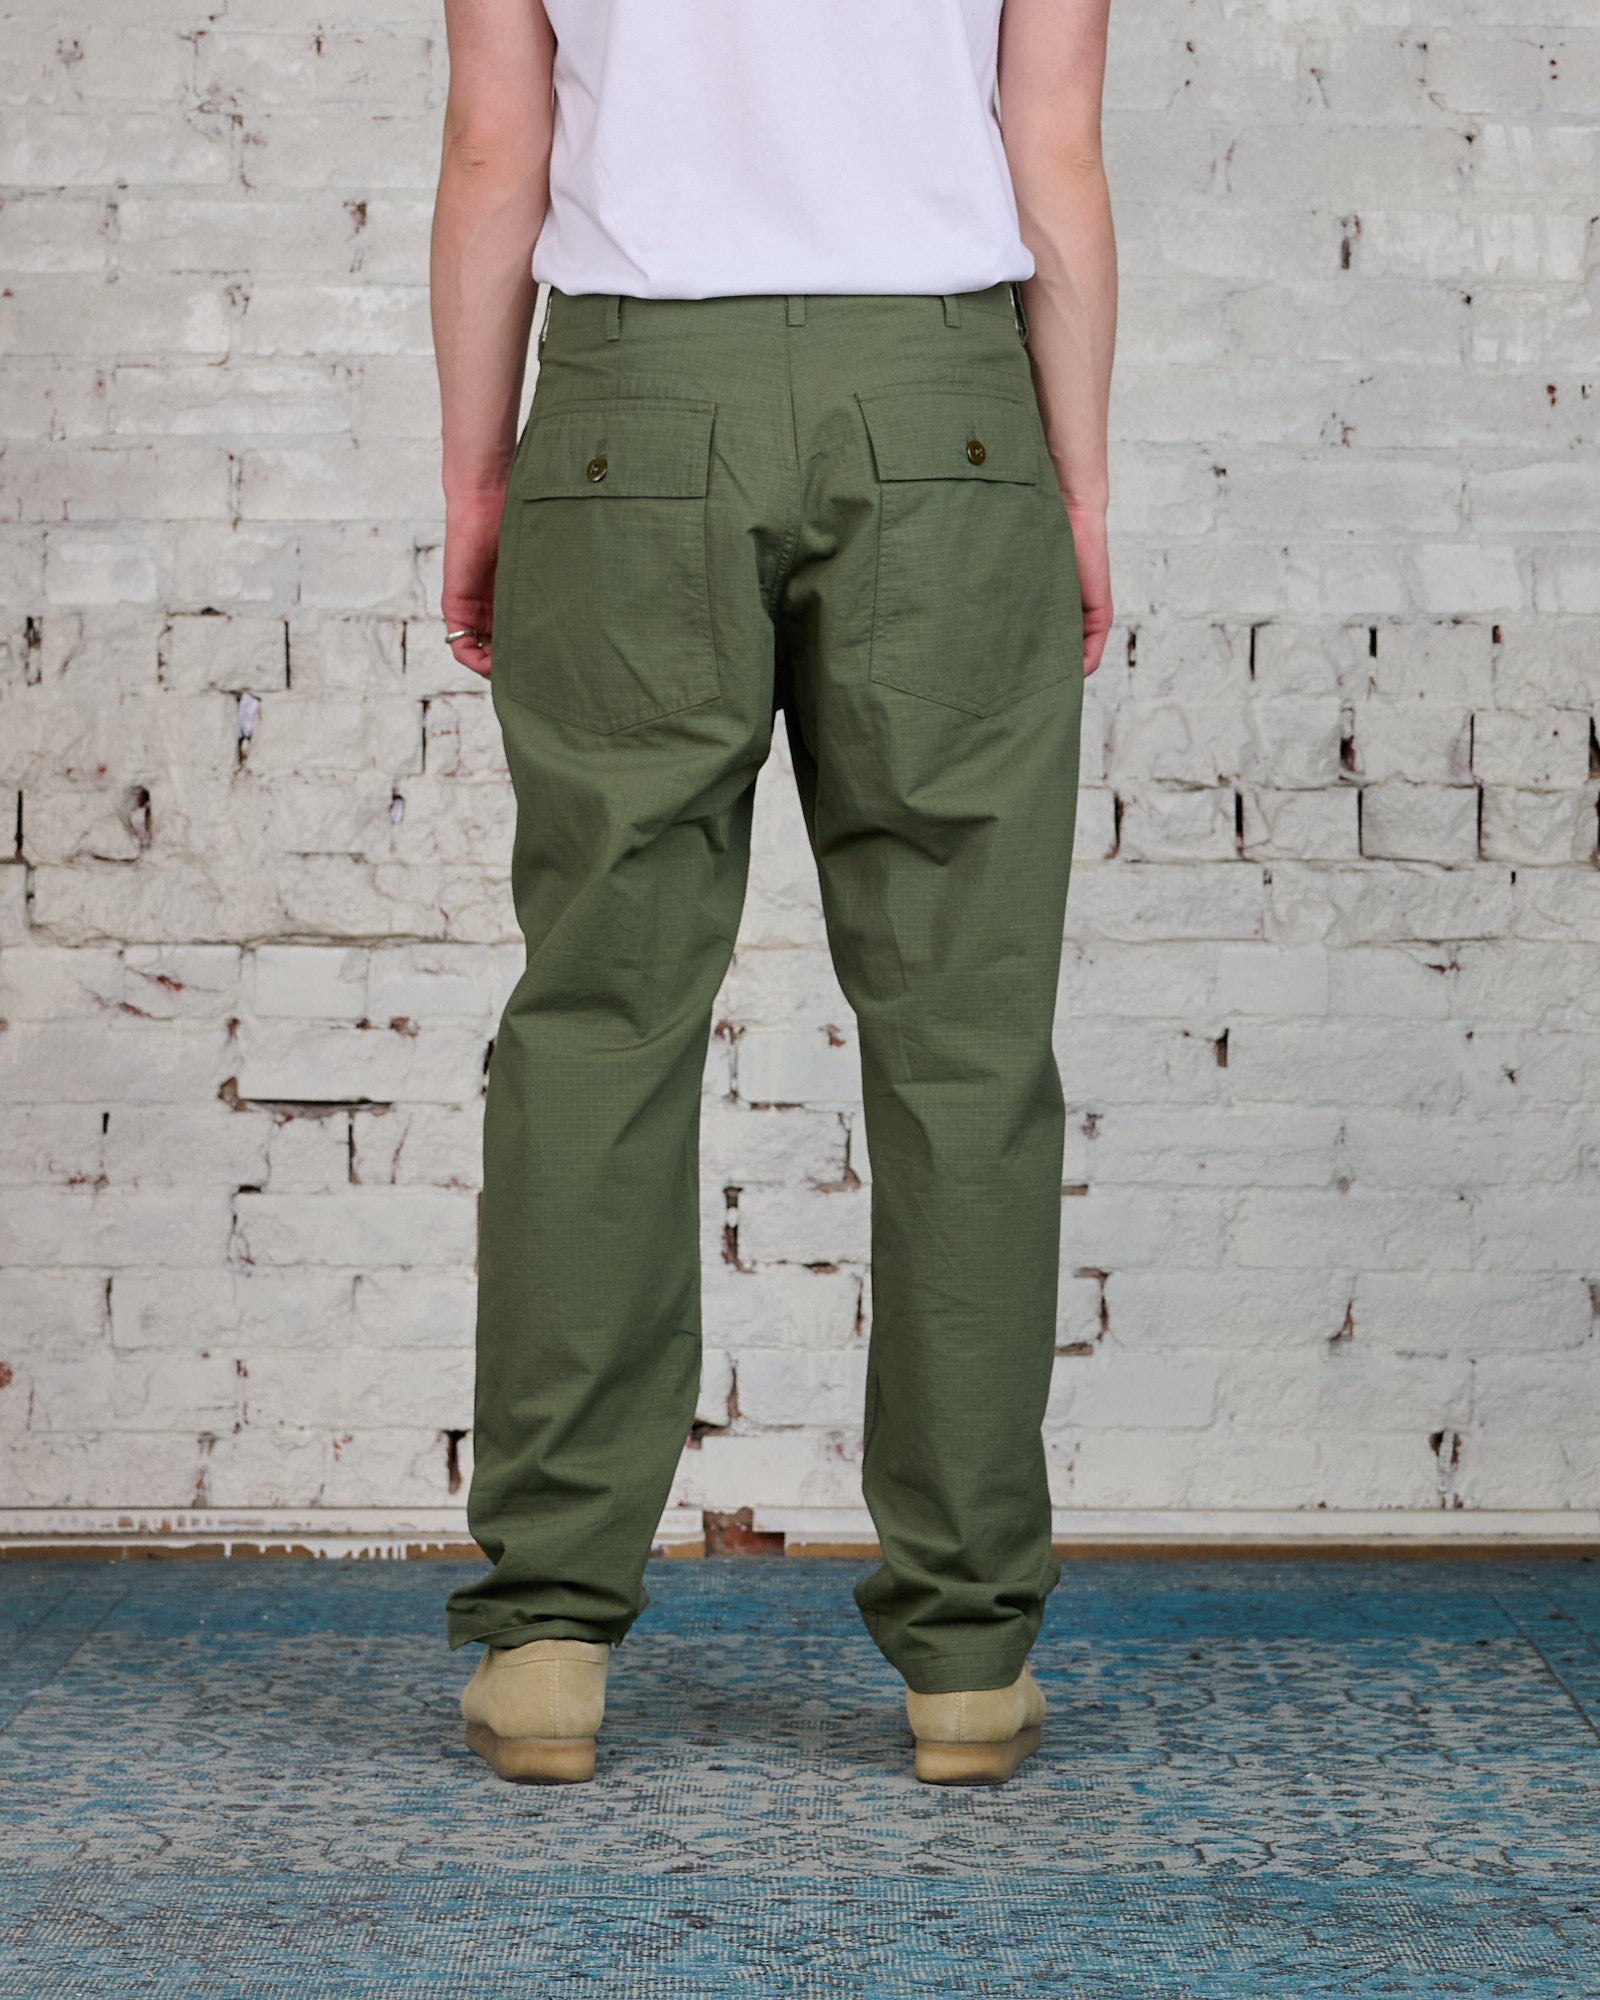 Engineered Garments Fatigue Pant Olive Cotton Ripstop – LESS 17